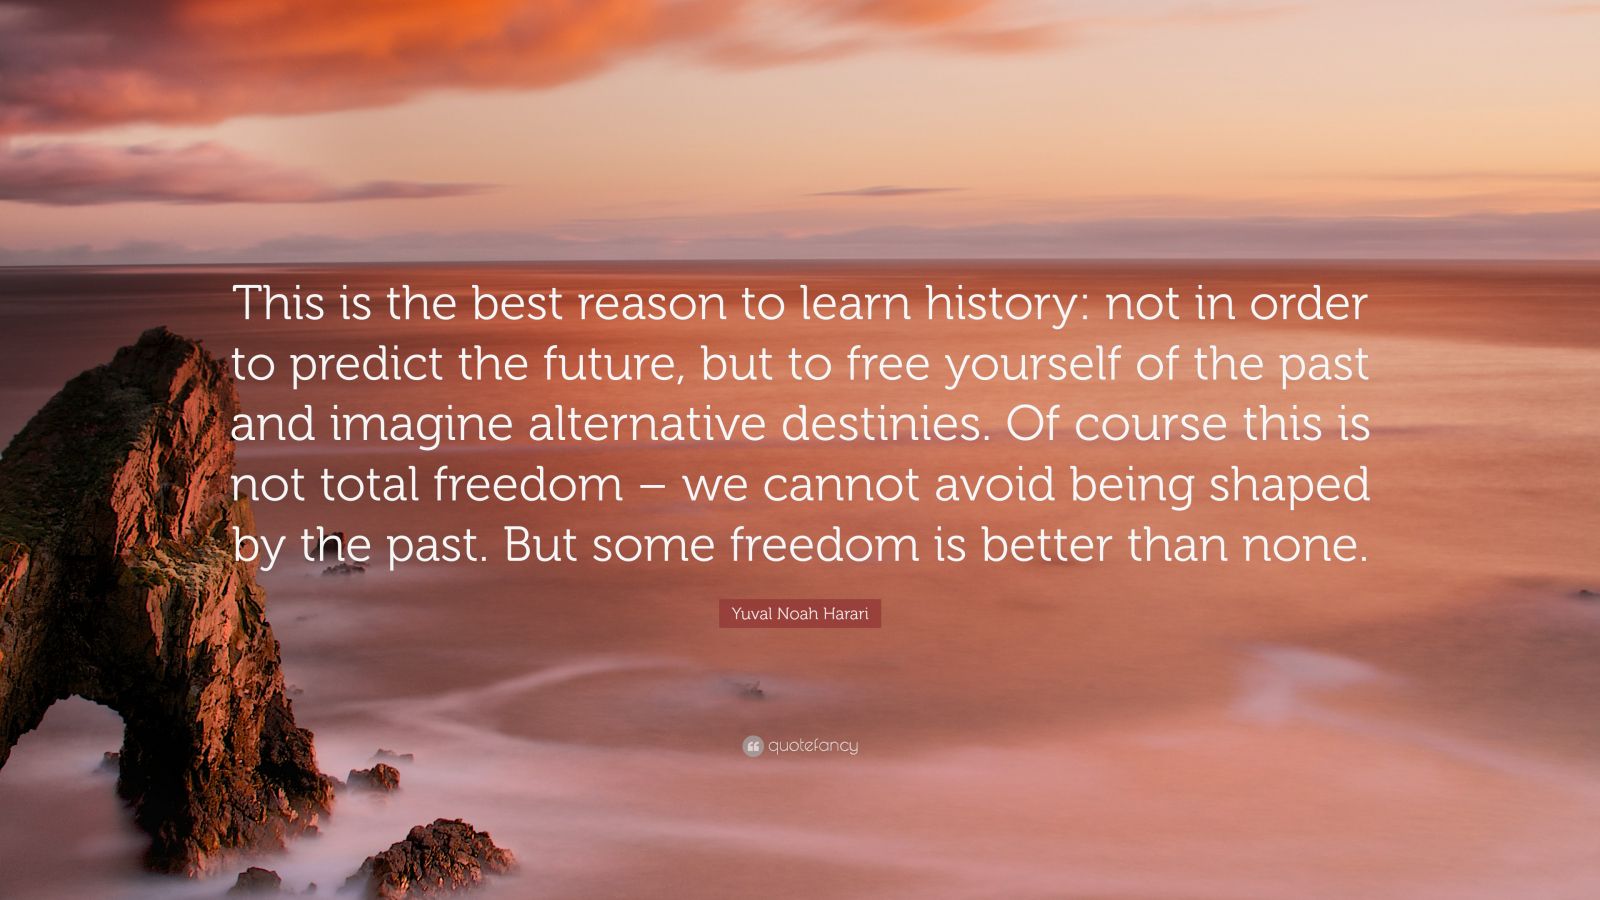 Yuval Noah Harari Quote: “This is the best reason to learn history: not